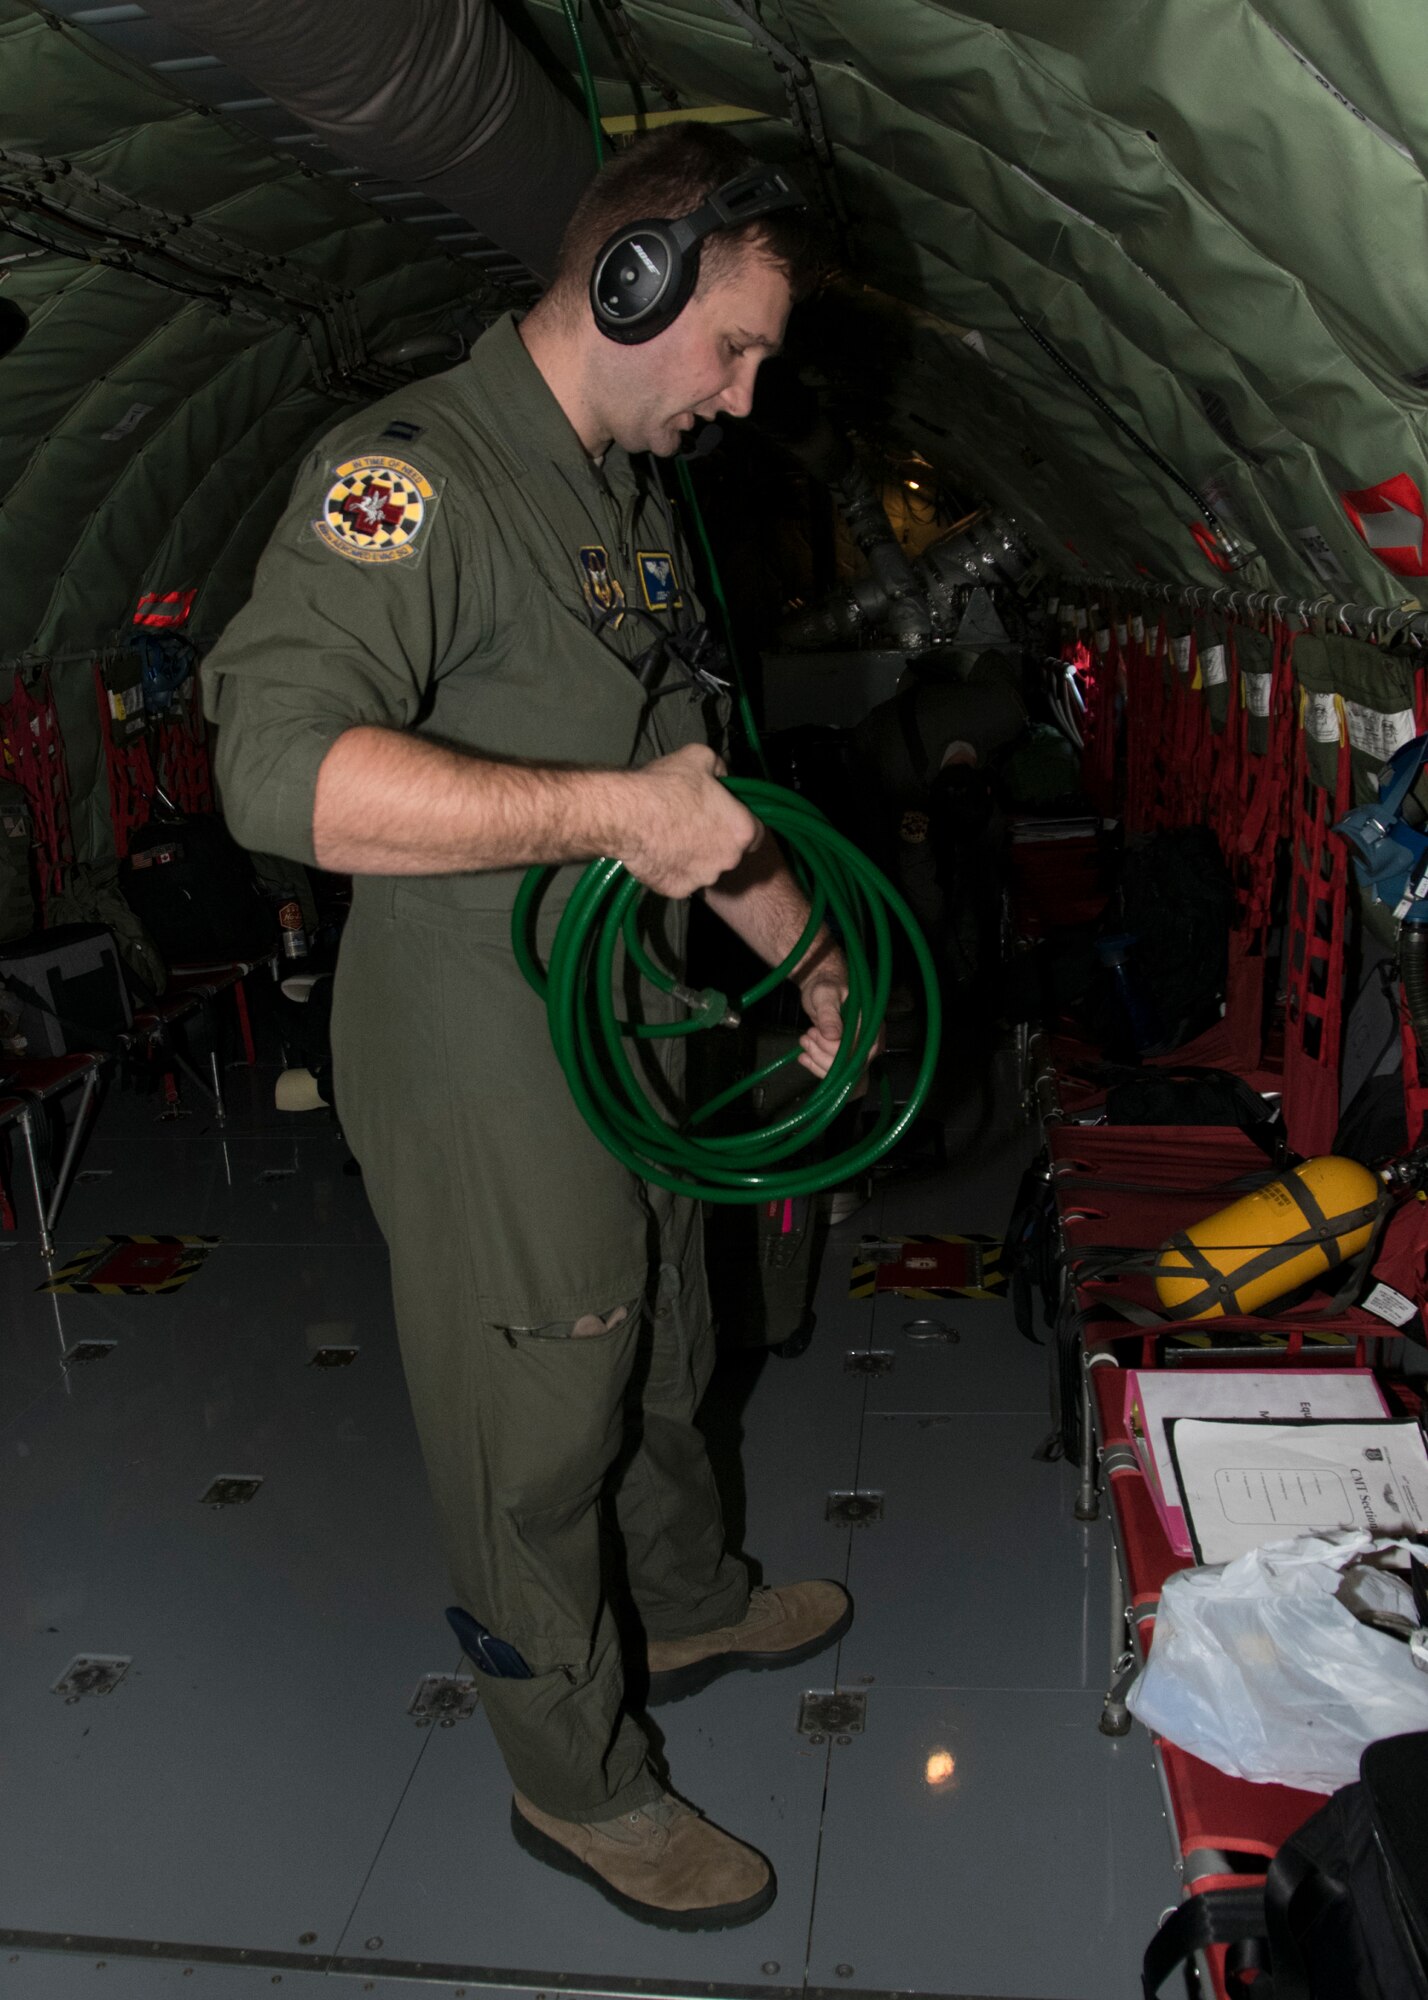 Capt. Joseph Dabbs, 459th Aeromedical Evacuation Squadron flight nurse, unravels an oxygen hose, as part of an off station trainer on a KC-135 Stratotanker Sept. 20, 2019, at Joint Base Andrews, Md. Members from the AES team conducted training on the way to Wright Patterson Air Force Base, Ohio, where they also ran in the Air Force Marathon. (U.S. Air Force photo by Staff Sgt. Cierra Presentado/Released)